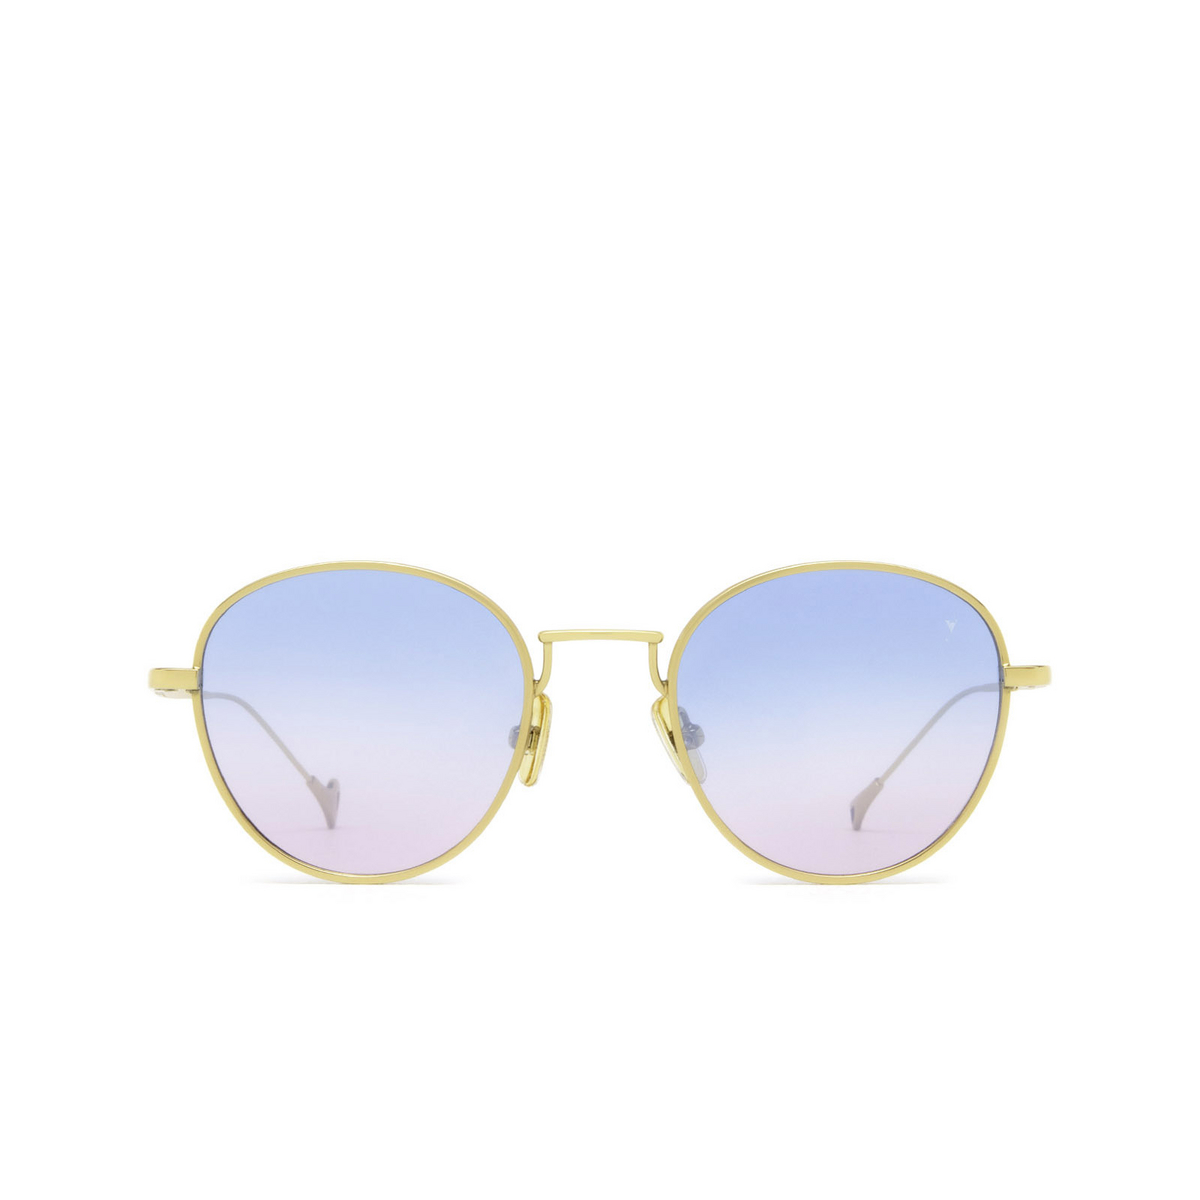 Eyepetizer® Round Sunglasses: Alen color Gold C.4-42F - front view.